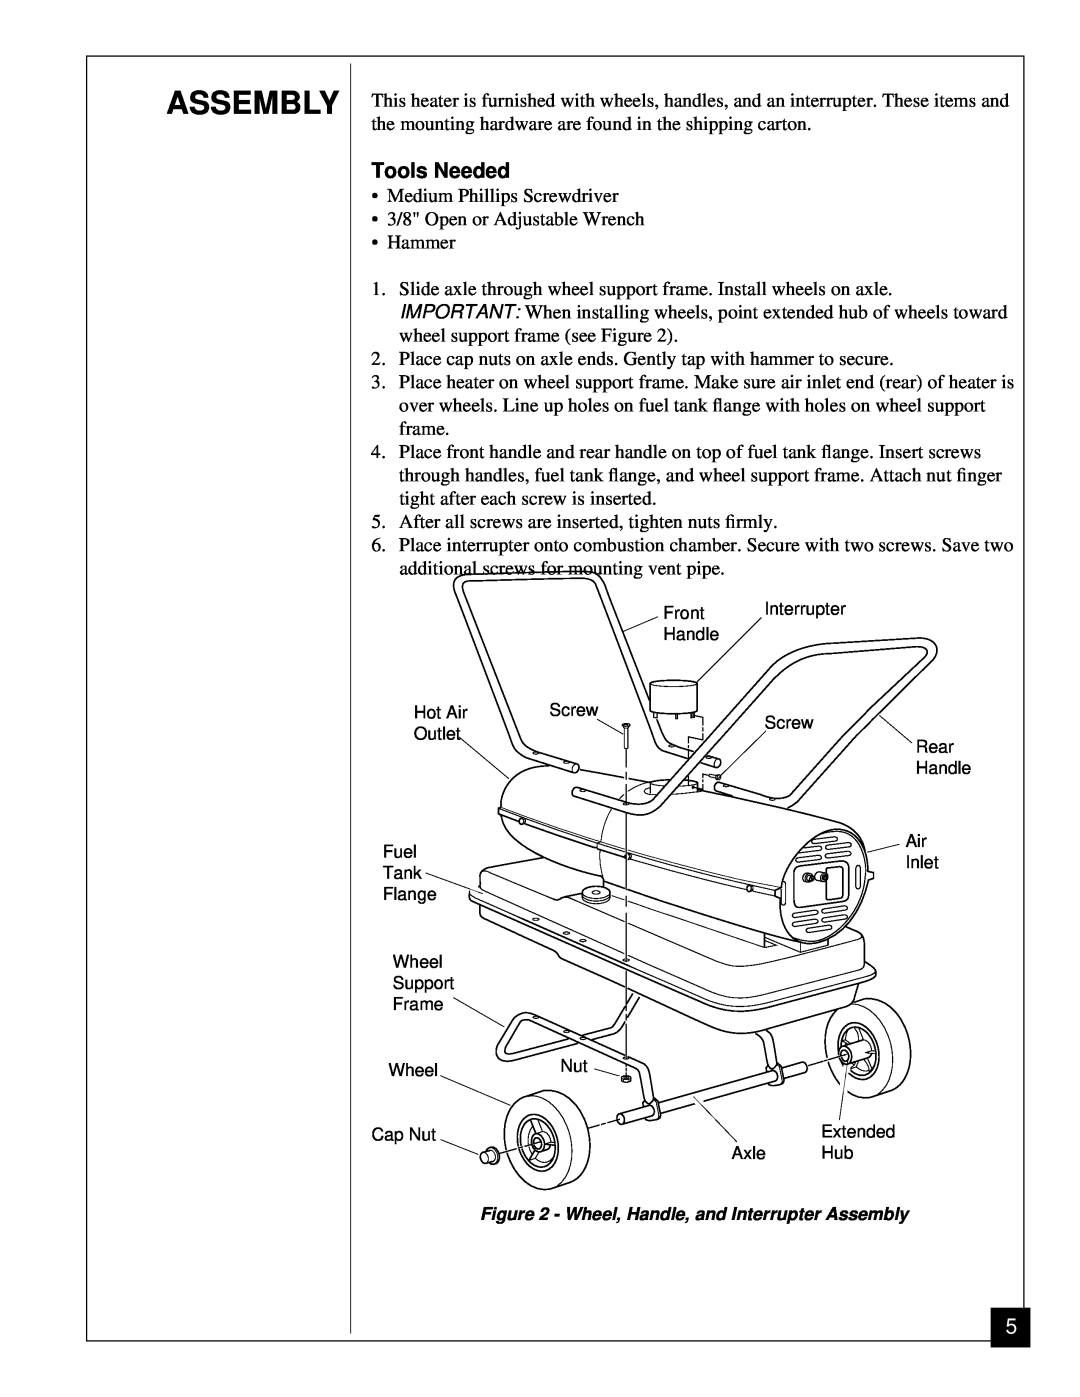 Desa RV125EDI owner manual Assembly, Tools Needed 